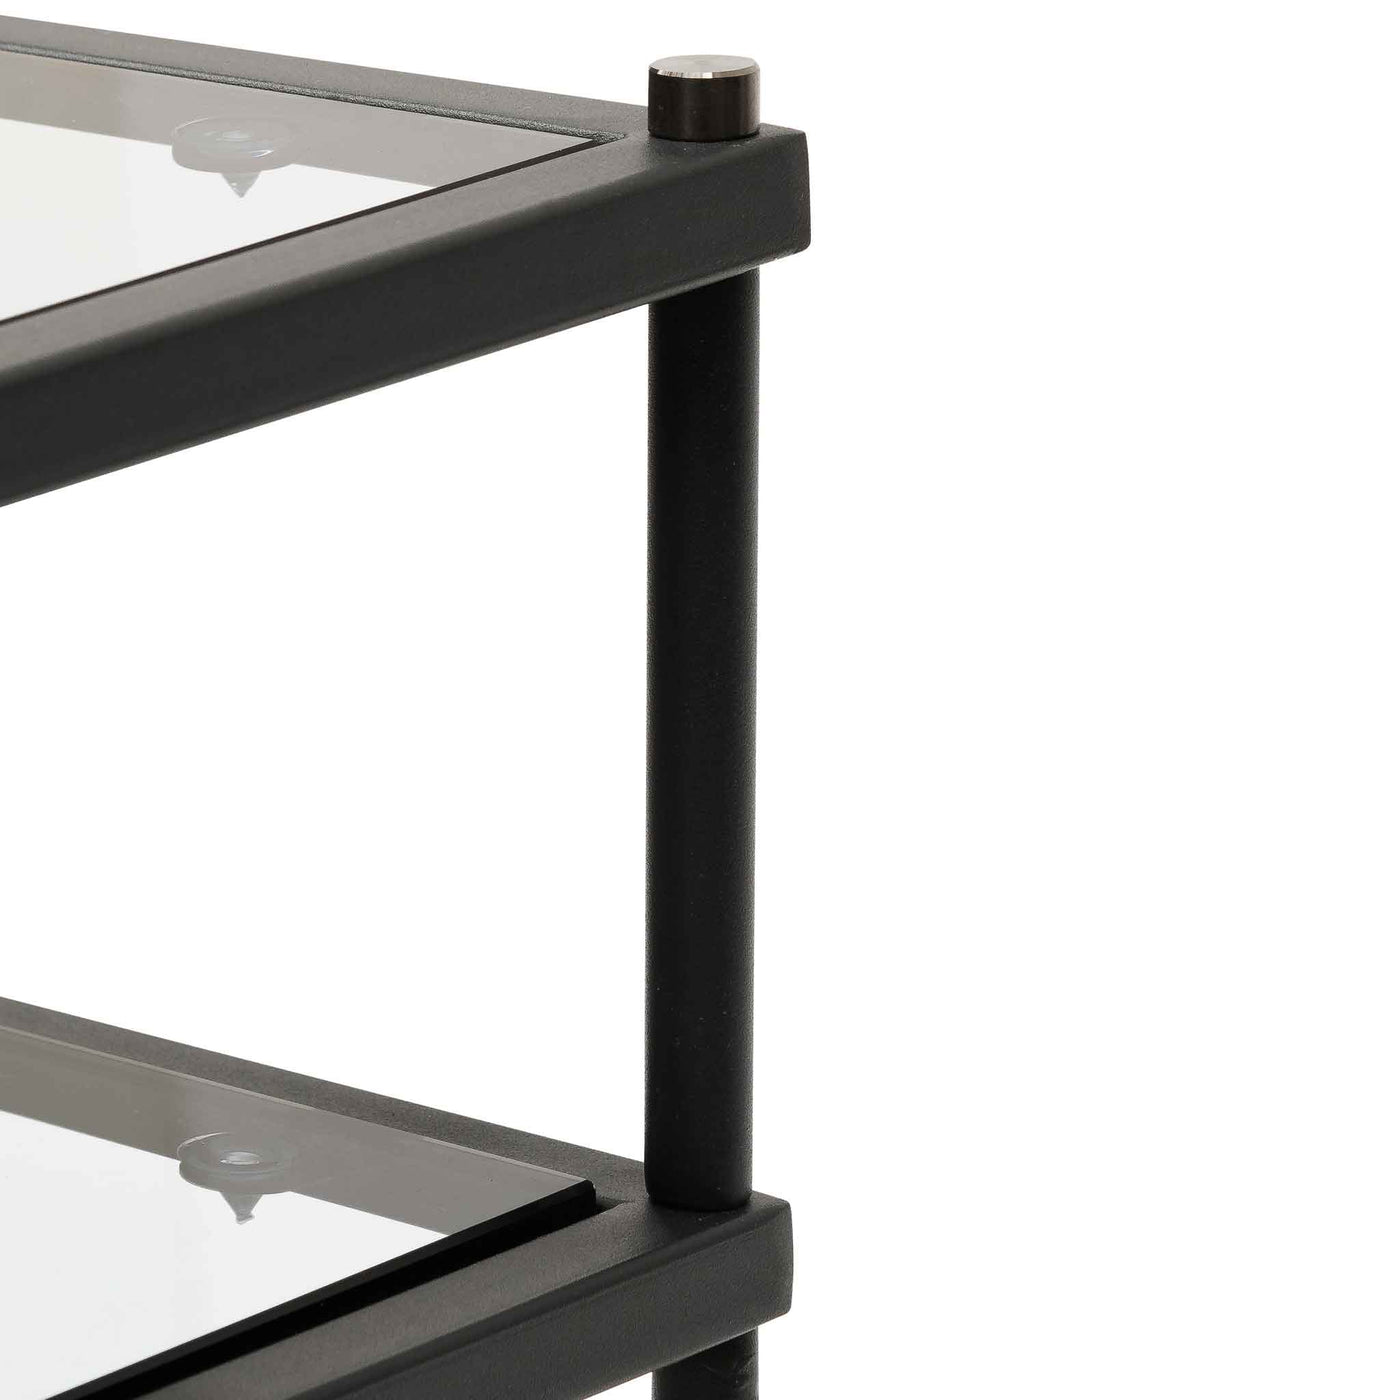 1.2m Grey Glass Console Table - Black Base